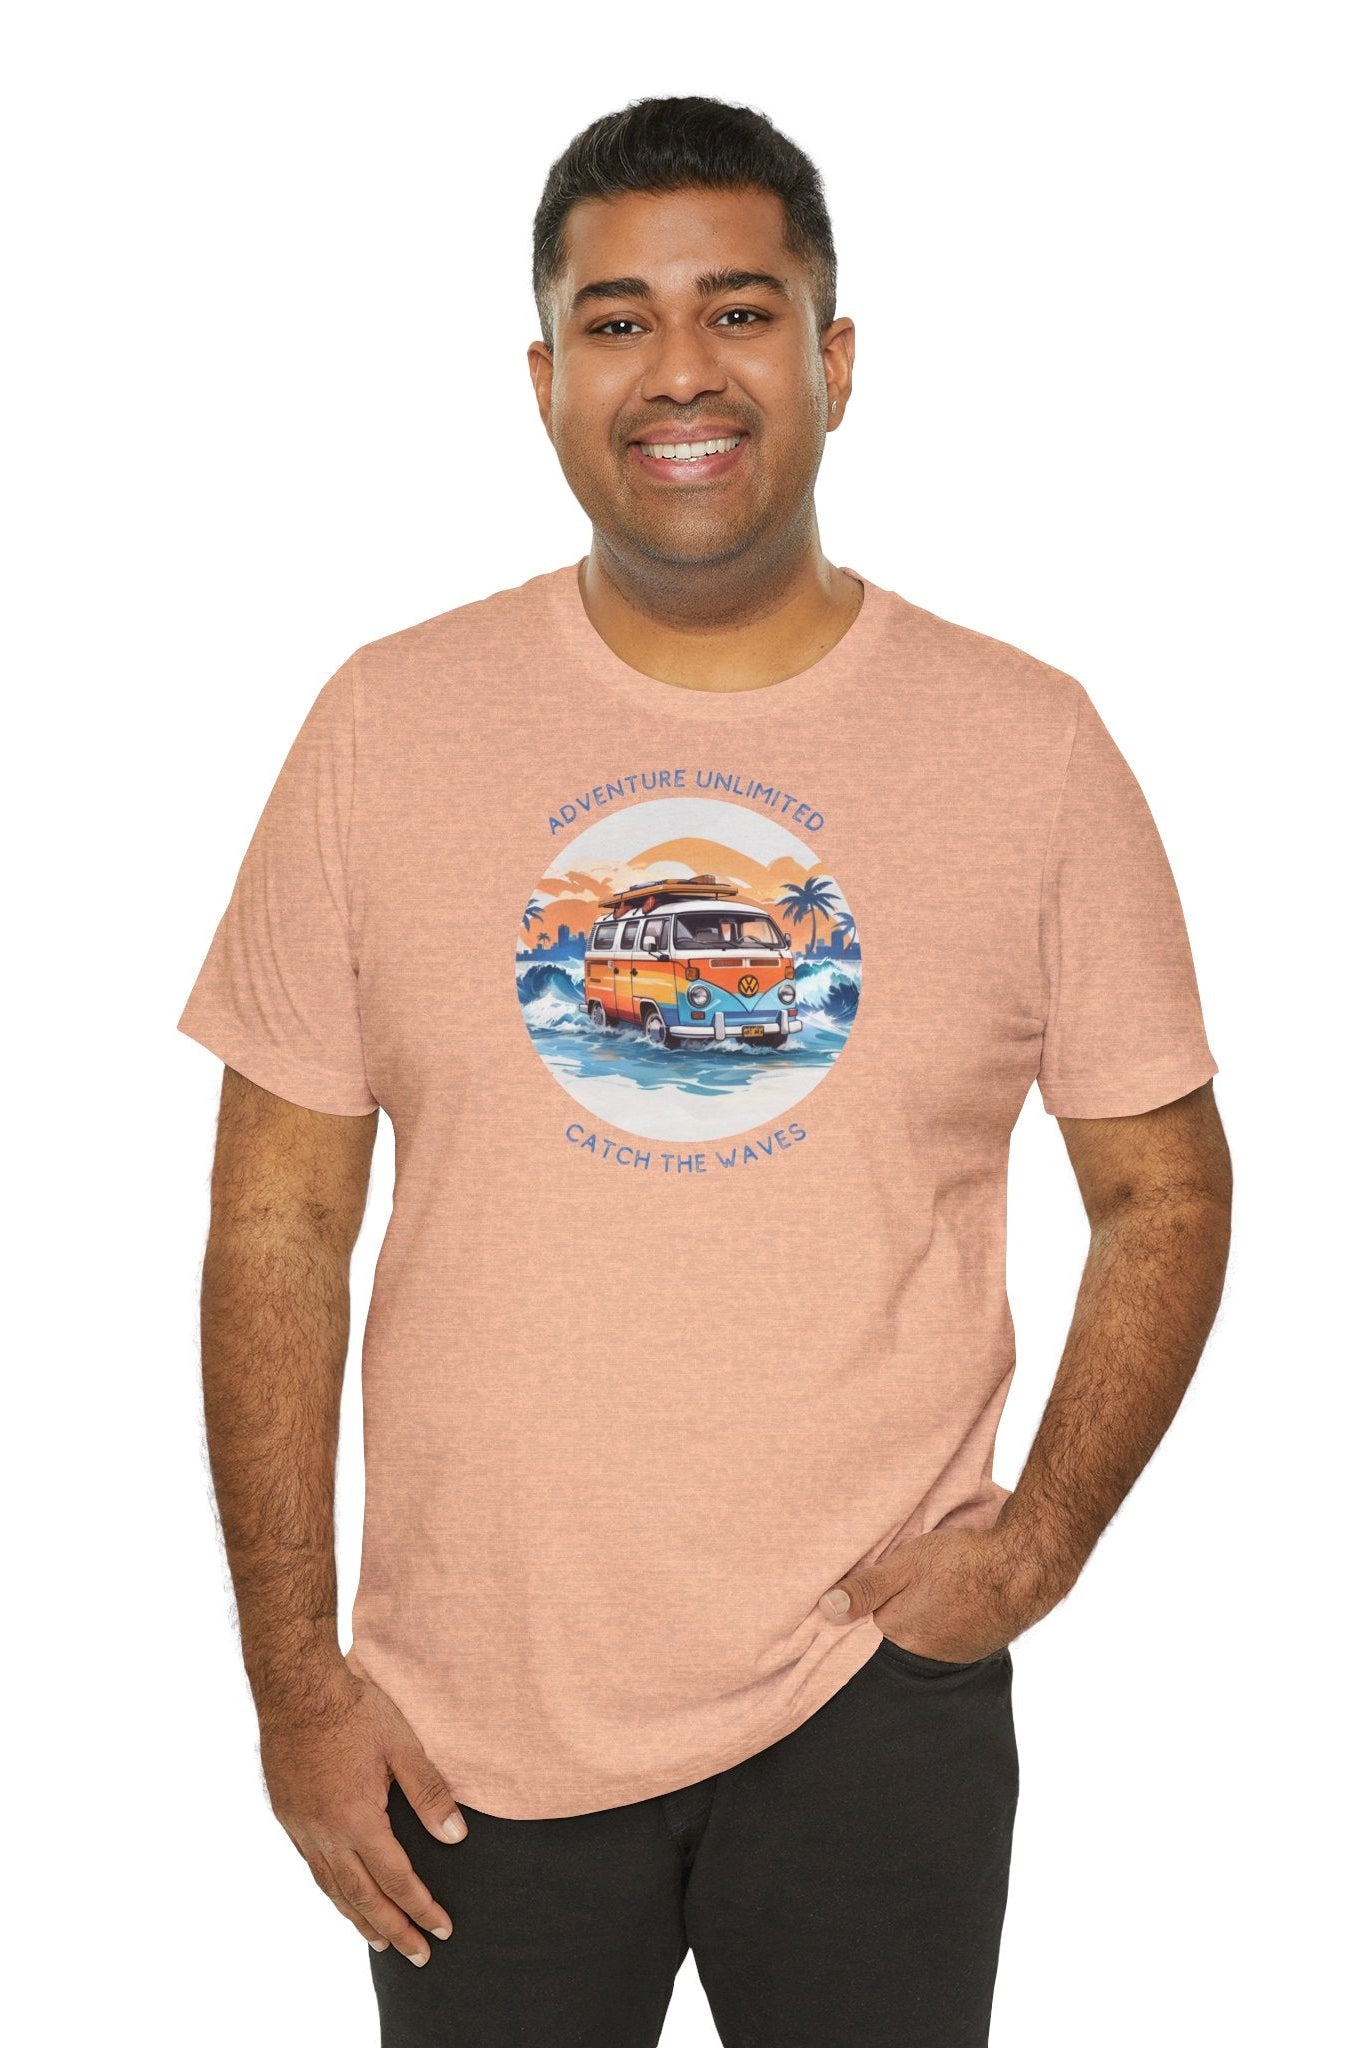 Adventure Unlimited Surfing T-Shirt with Man Wearing Pink Shirt Printed Direct-to-Garment - Soulshinecreators - EU